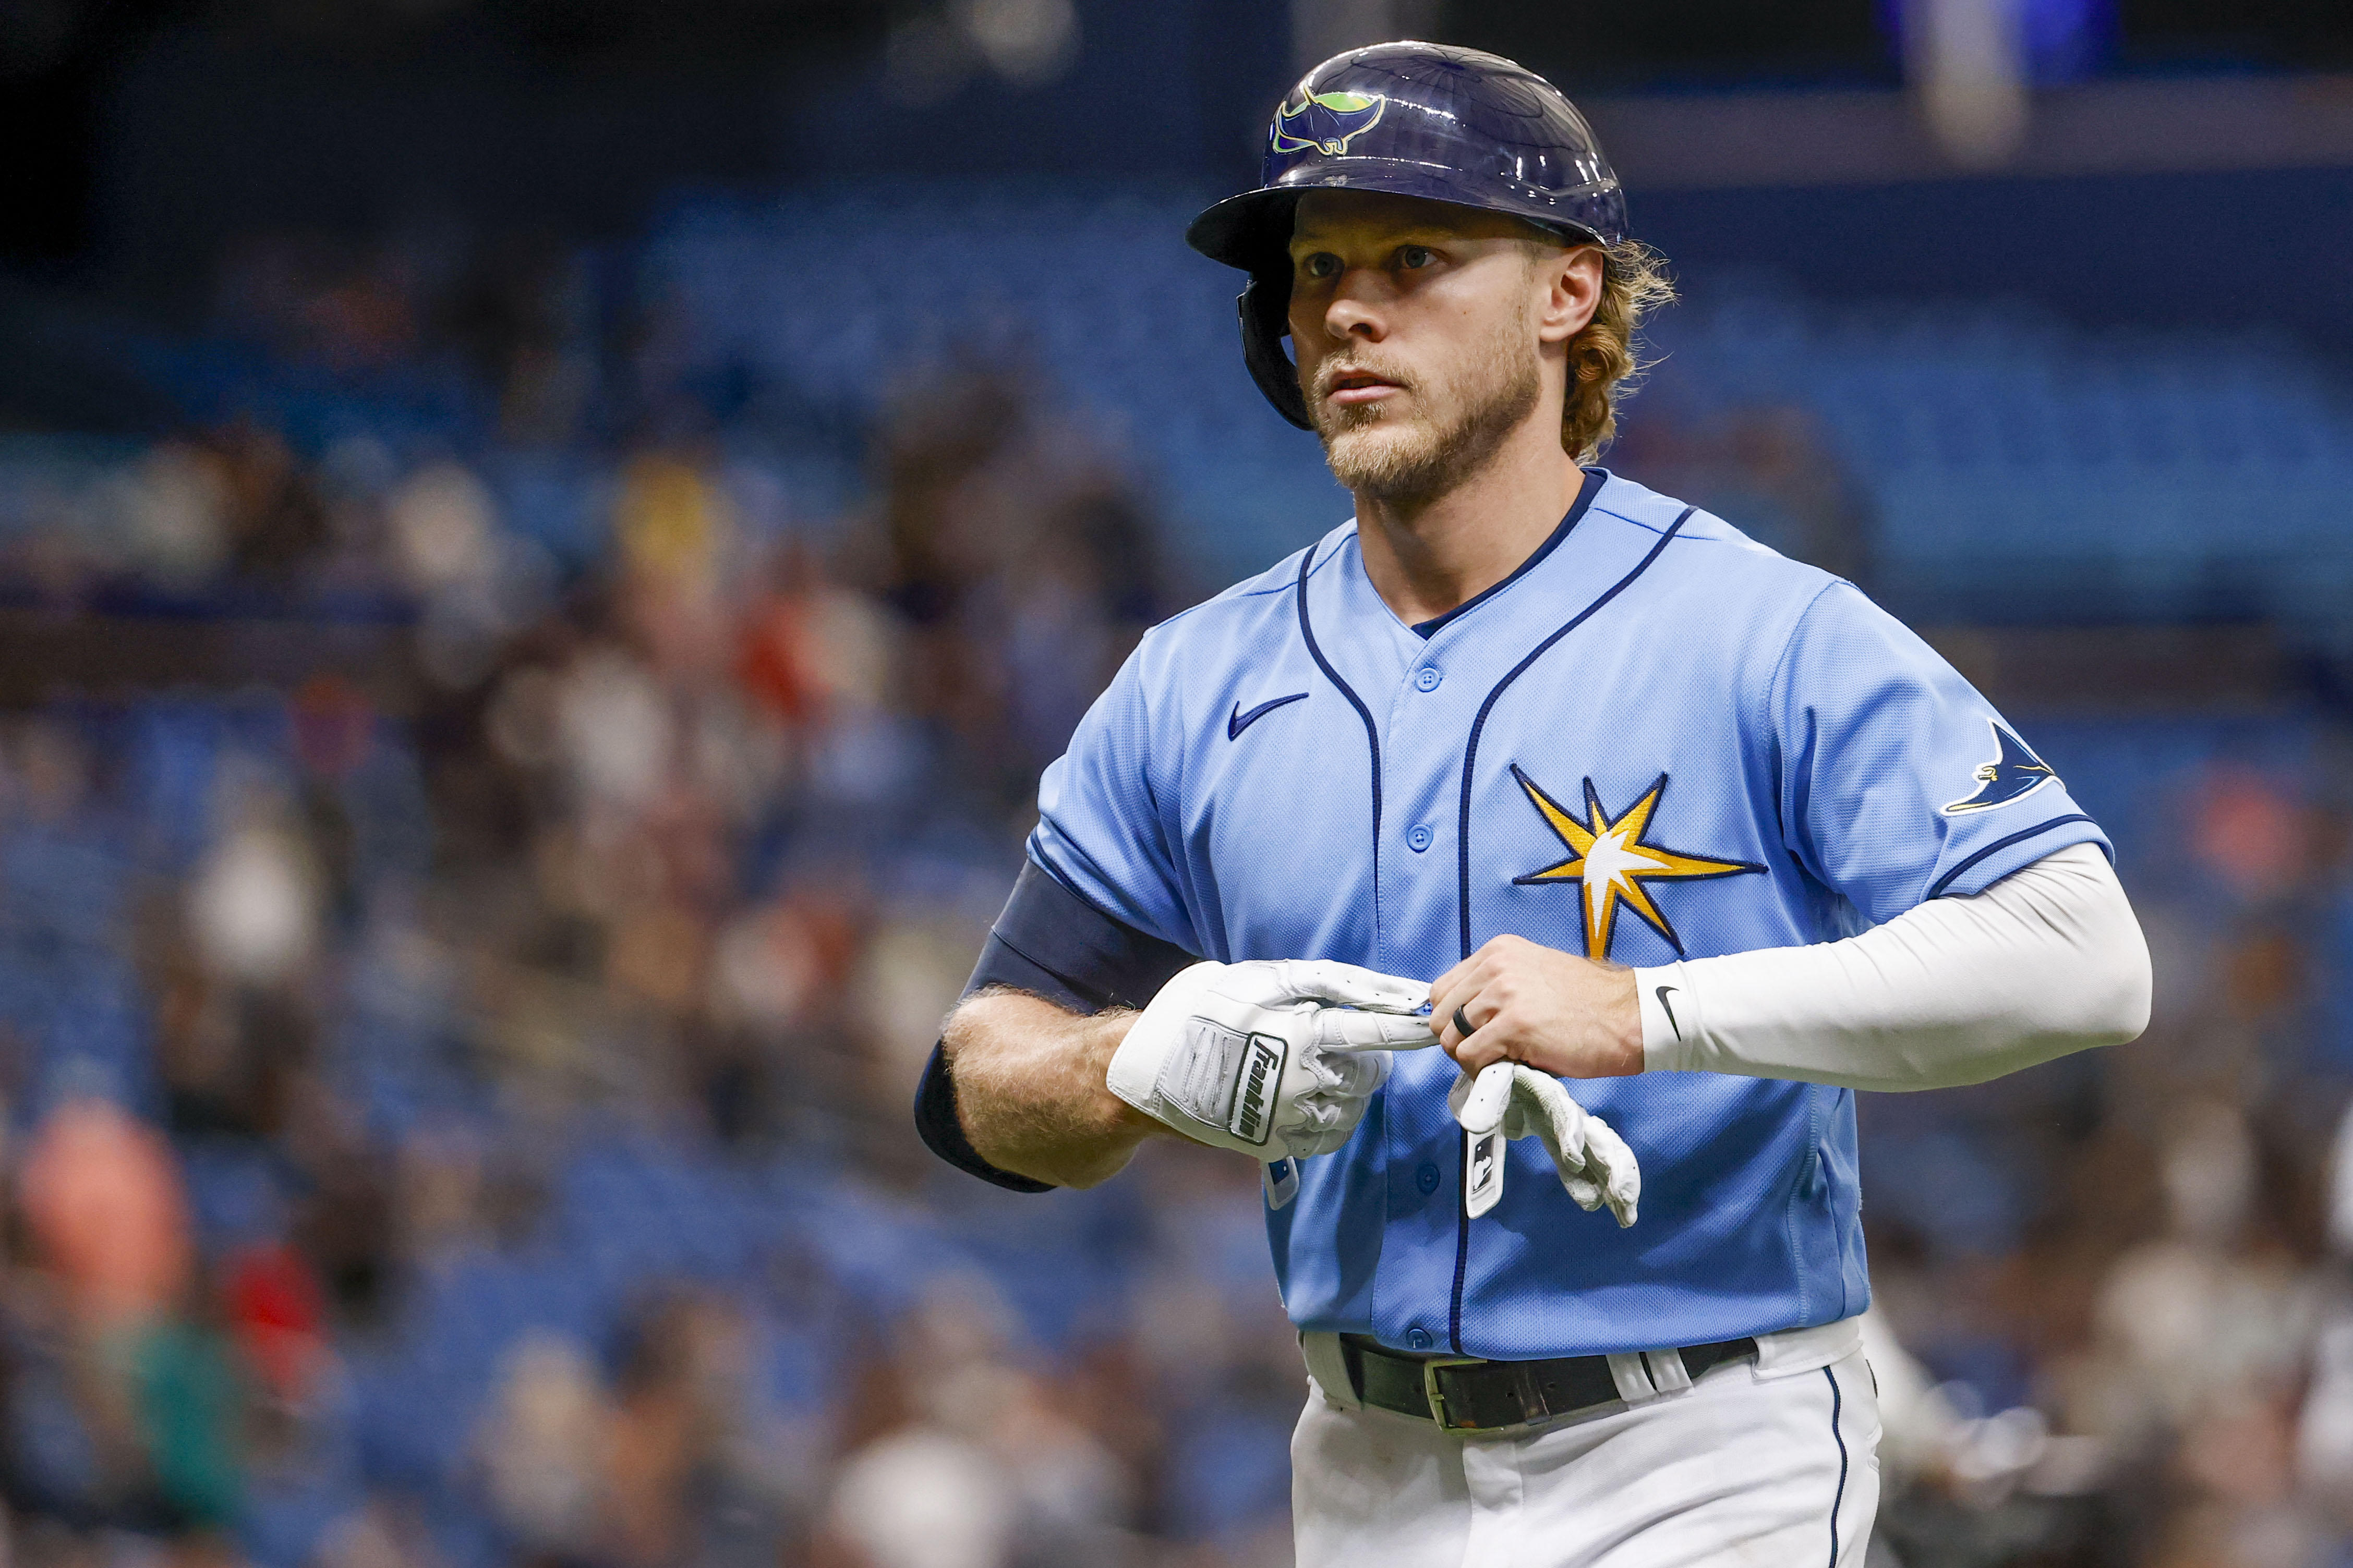 Series Preview: Rays face White Sox with Pride - DRaysBay